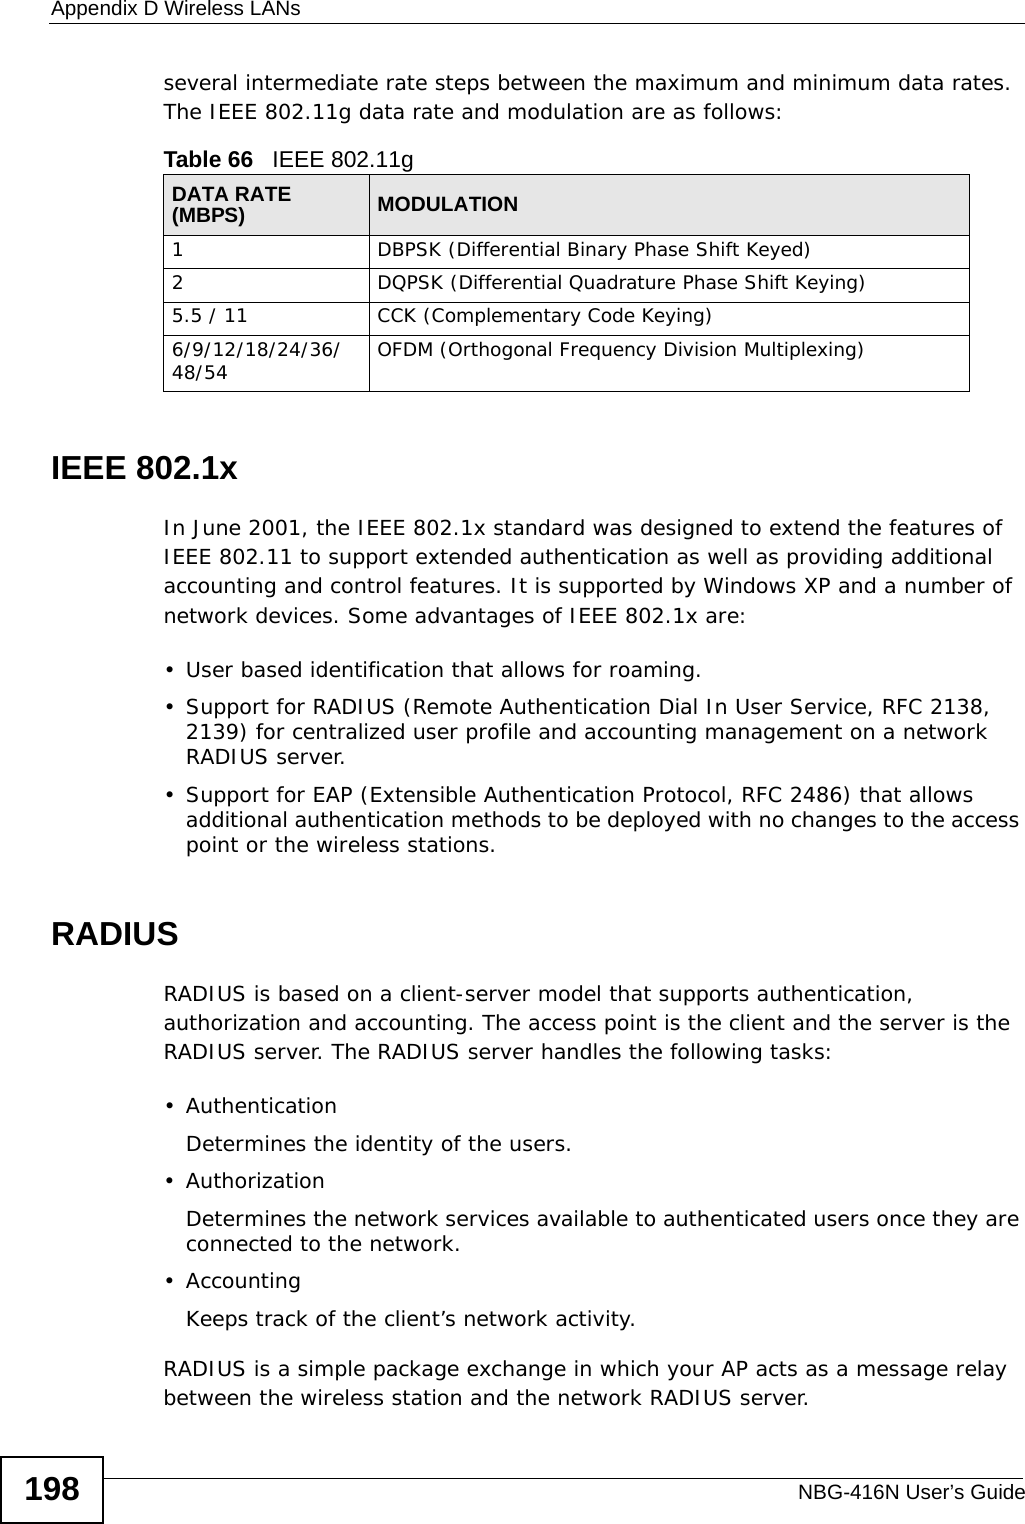 Appendix D Wireless LANsNBG-416N User’s Guide198several intermediate rate steps between the maximum and minimum data rates. The IEEE 802.11g data rate and modulation are as follows:IEEE 802.1xIn June 2001, the IEEE 802.1x standard was designed to extend the features of IEEE 802.11 to support extended authentication as well as providing additional accounting and control features. It is supported by Windows XP and a number of network devices. Some advantages of IEEE 802.1x are:• User based identification that allows for roaming.• Support for RADIUS (Remote Authentication Dial In User Service, RFC 2138, 2139) for centralized user profile and accounting management on a network RADIUS server. • Support for EAP (Extensible Authentication Protocol, RFC 2486) that allows additional authentication methods to be deployed with no changes to the access point or the wireless stations. RADIUSRADIUS is based on a client-server model that supports authentication, authorization and accounting. The access point is the client and the server is the RADIUS server. The RADIUS server handles the following tasks:• Authentication Determines the identity of the users.• AuthorizationDetermines the network services available to authenticated users once they are connected to the network.•AccountingKeeps track of the client’s network activity. RADIUS is a simple package exchange in which your AP acts as a message relay between the wireless station and the network RADIUS server. Table 66   IEEE 802.11gDATA RATE (MBPS) MODULATION1 DBPSK (Differential Binary Phase Shift Keyed)2 DQPSK (Differential Quadrature Phase Shift Keying)5.5 / 11 CCK (Complementary Code Keying) 6/9/12/18/24/36/48/54 OFDM (Orthogonal Frequency Division Multiplexing) 